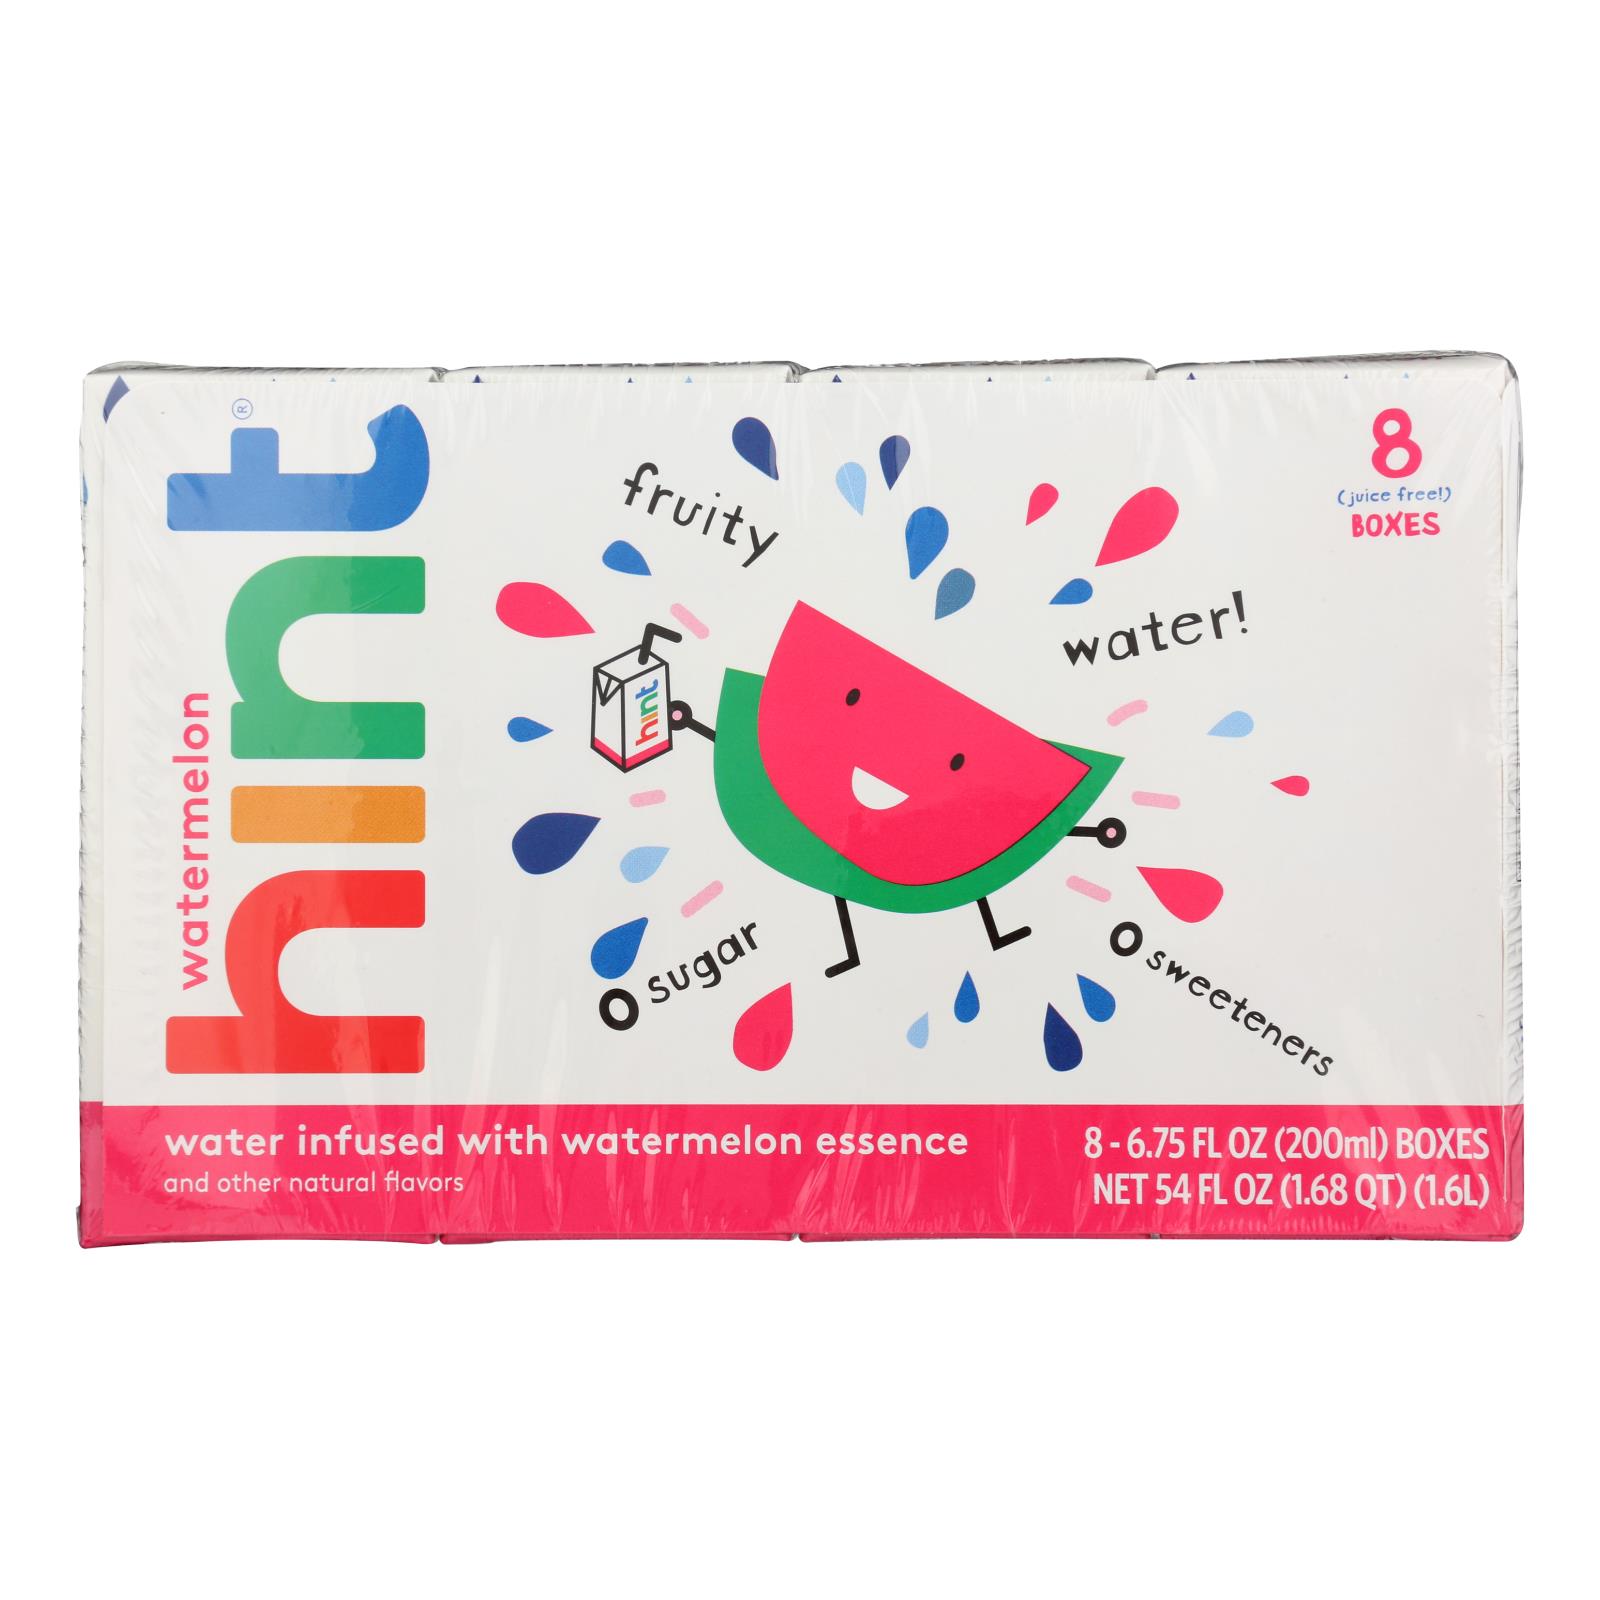 Hint - Water Watermelon Kds 8pck - 4개 묶음상품 - 8 PACK